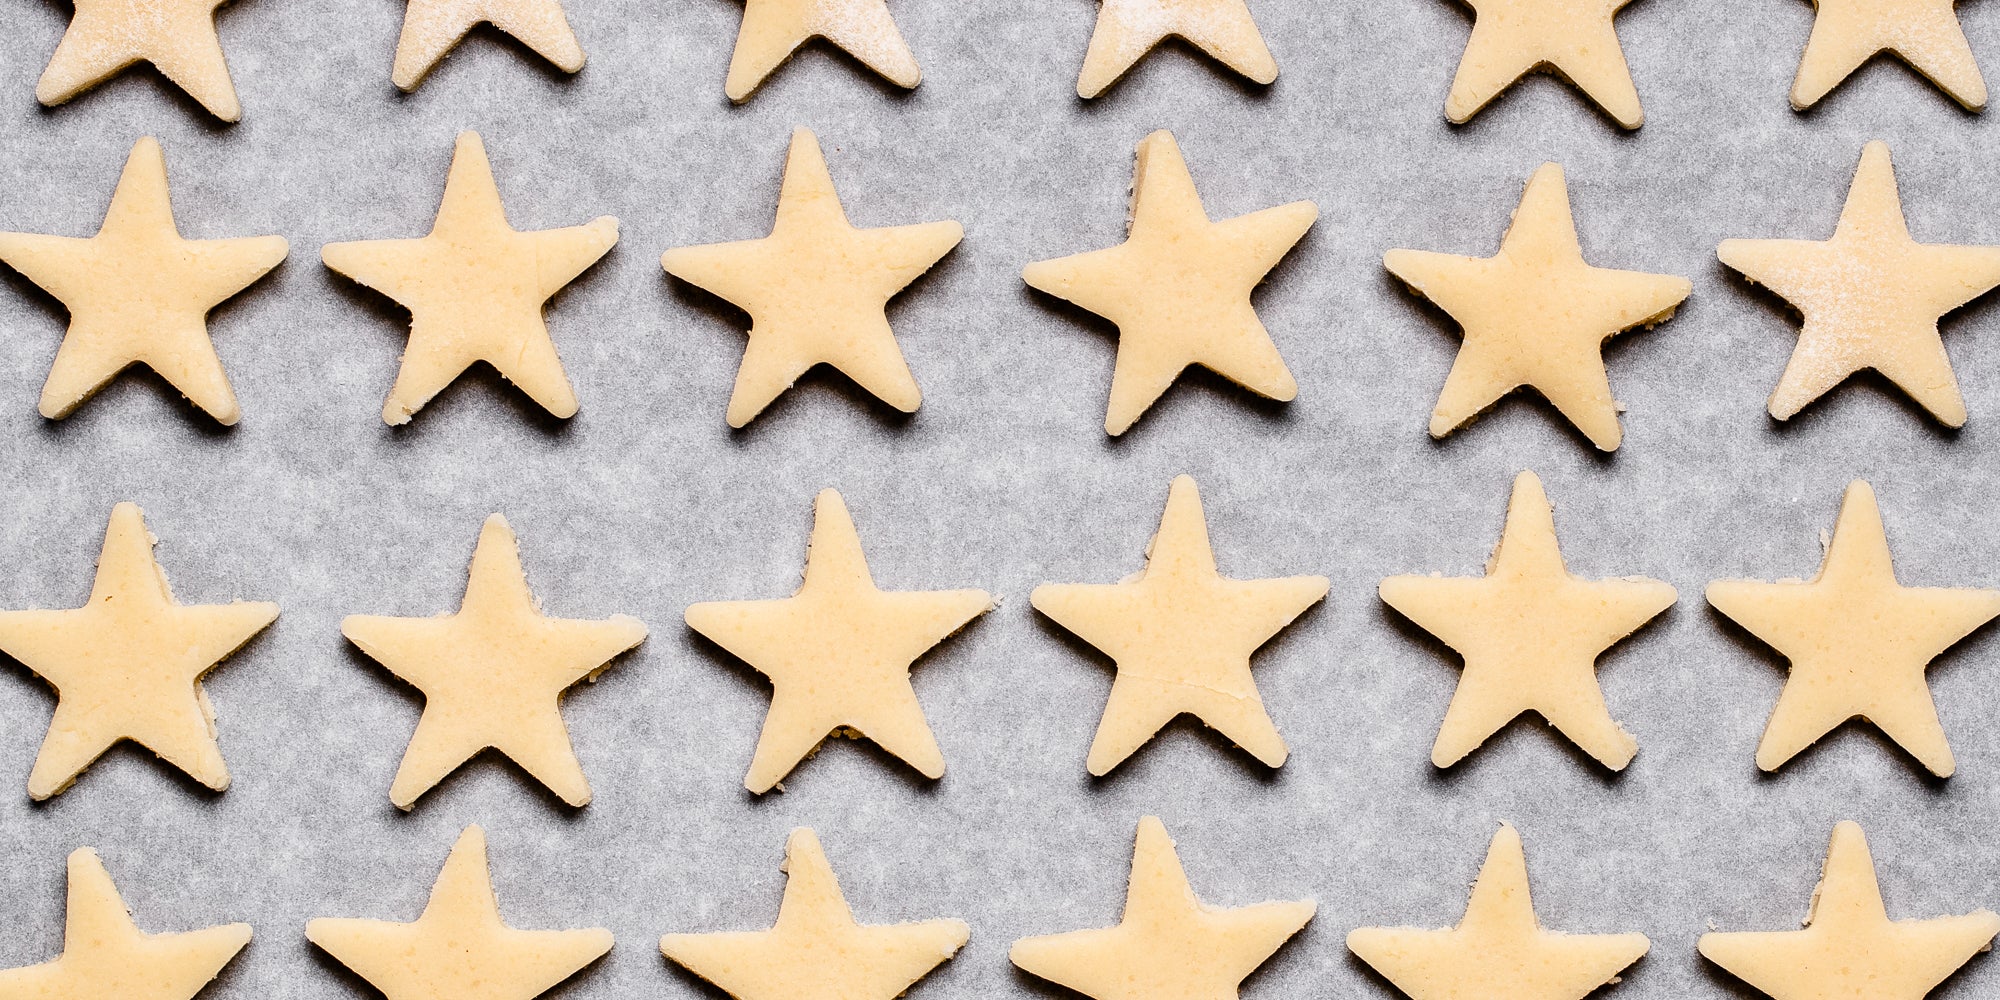 Star-shaped biscuits made with homemade vegan biscuit dough